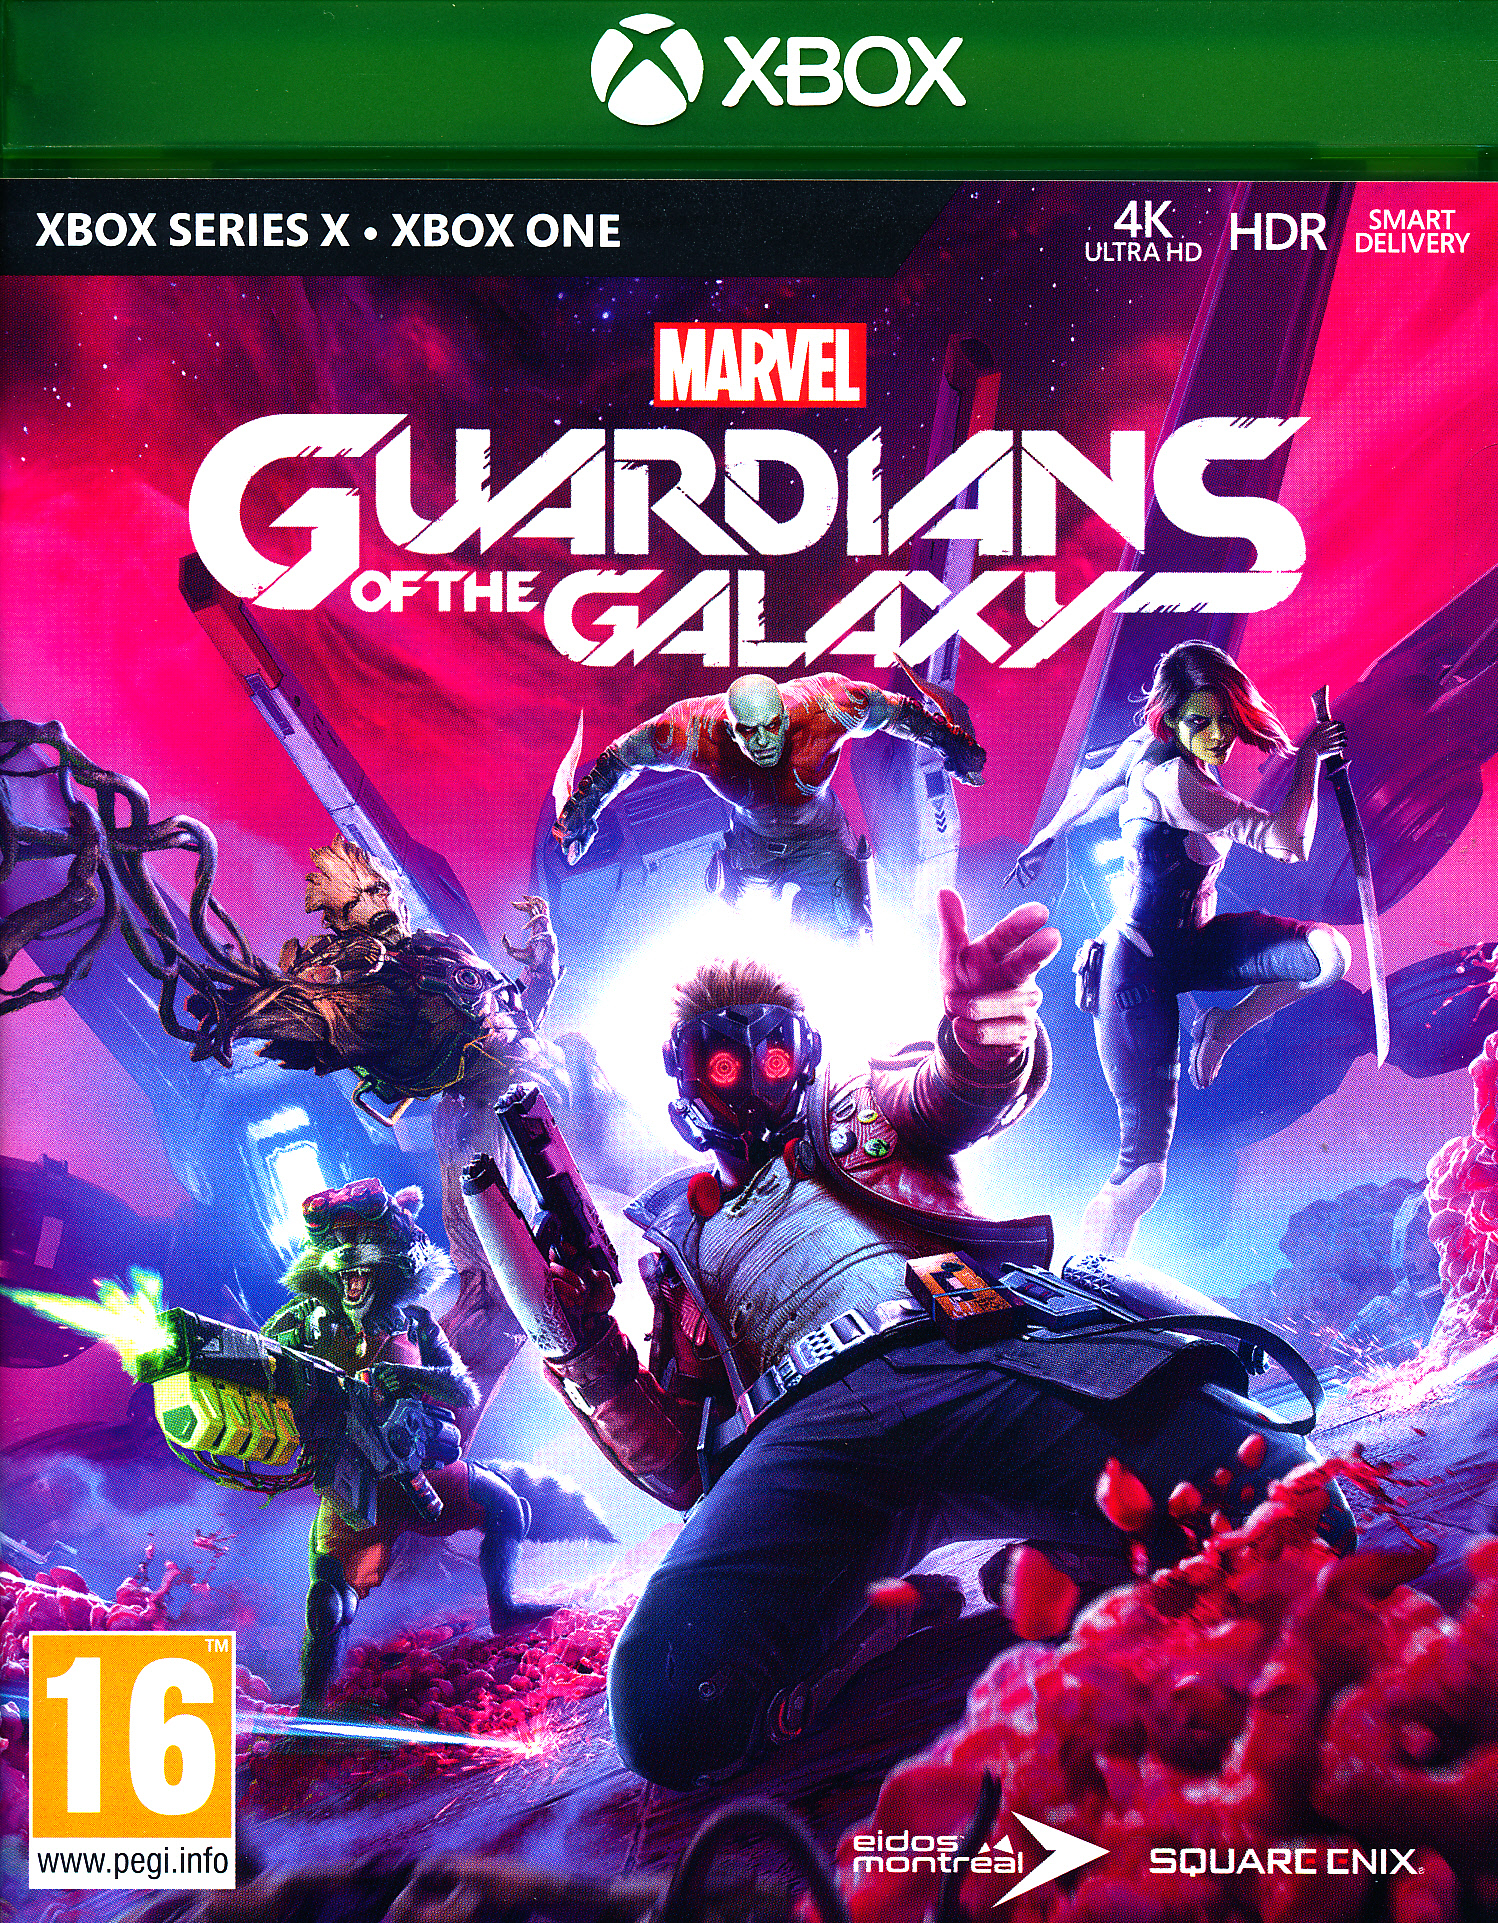 Marvels Guardians of the Galaxy XBO